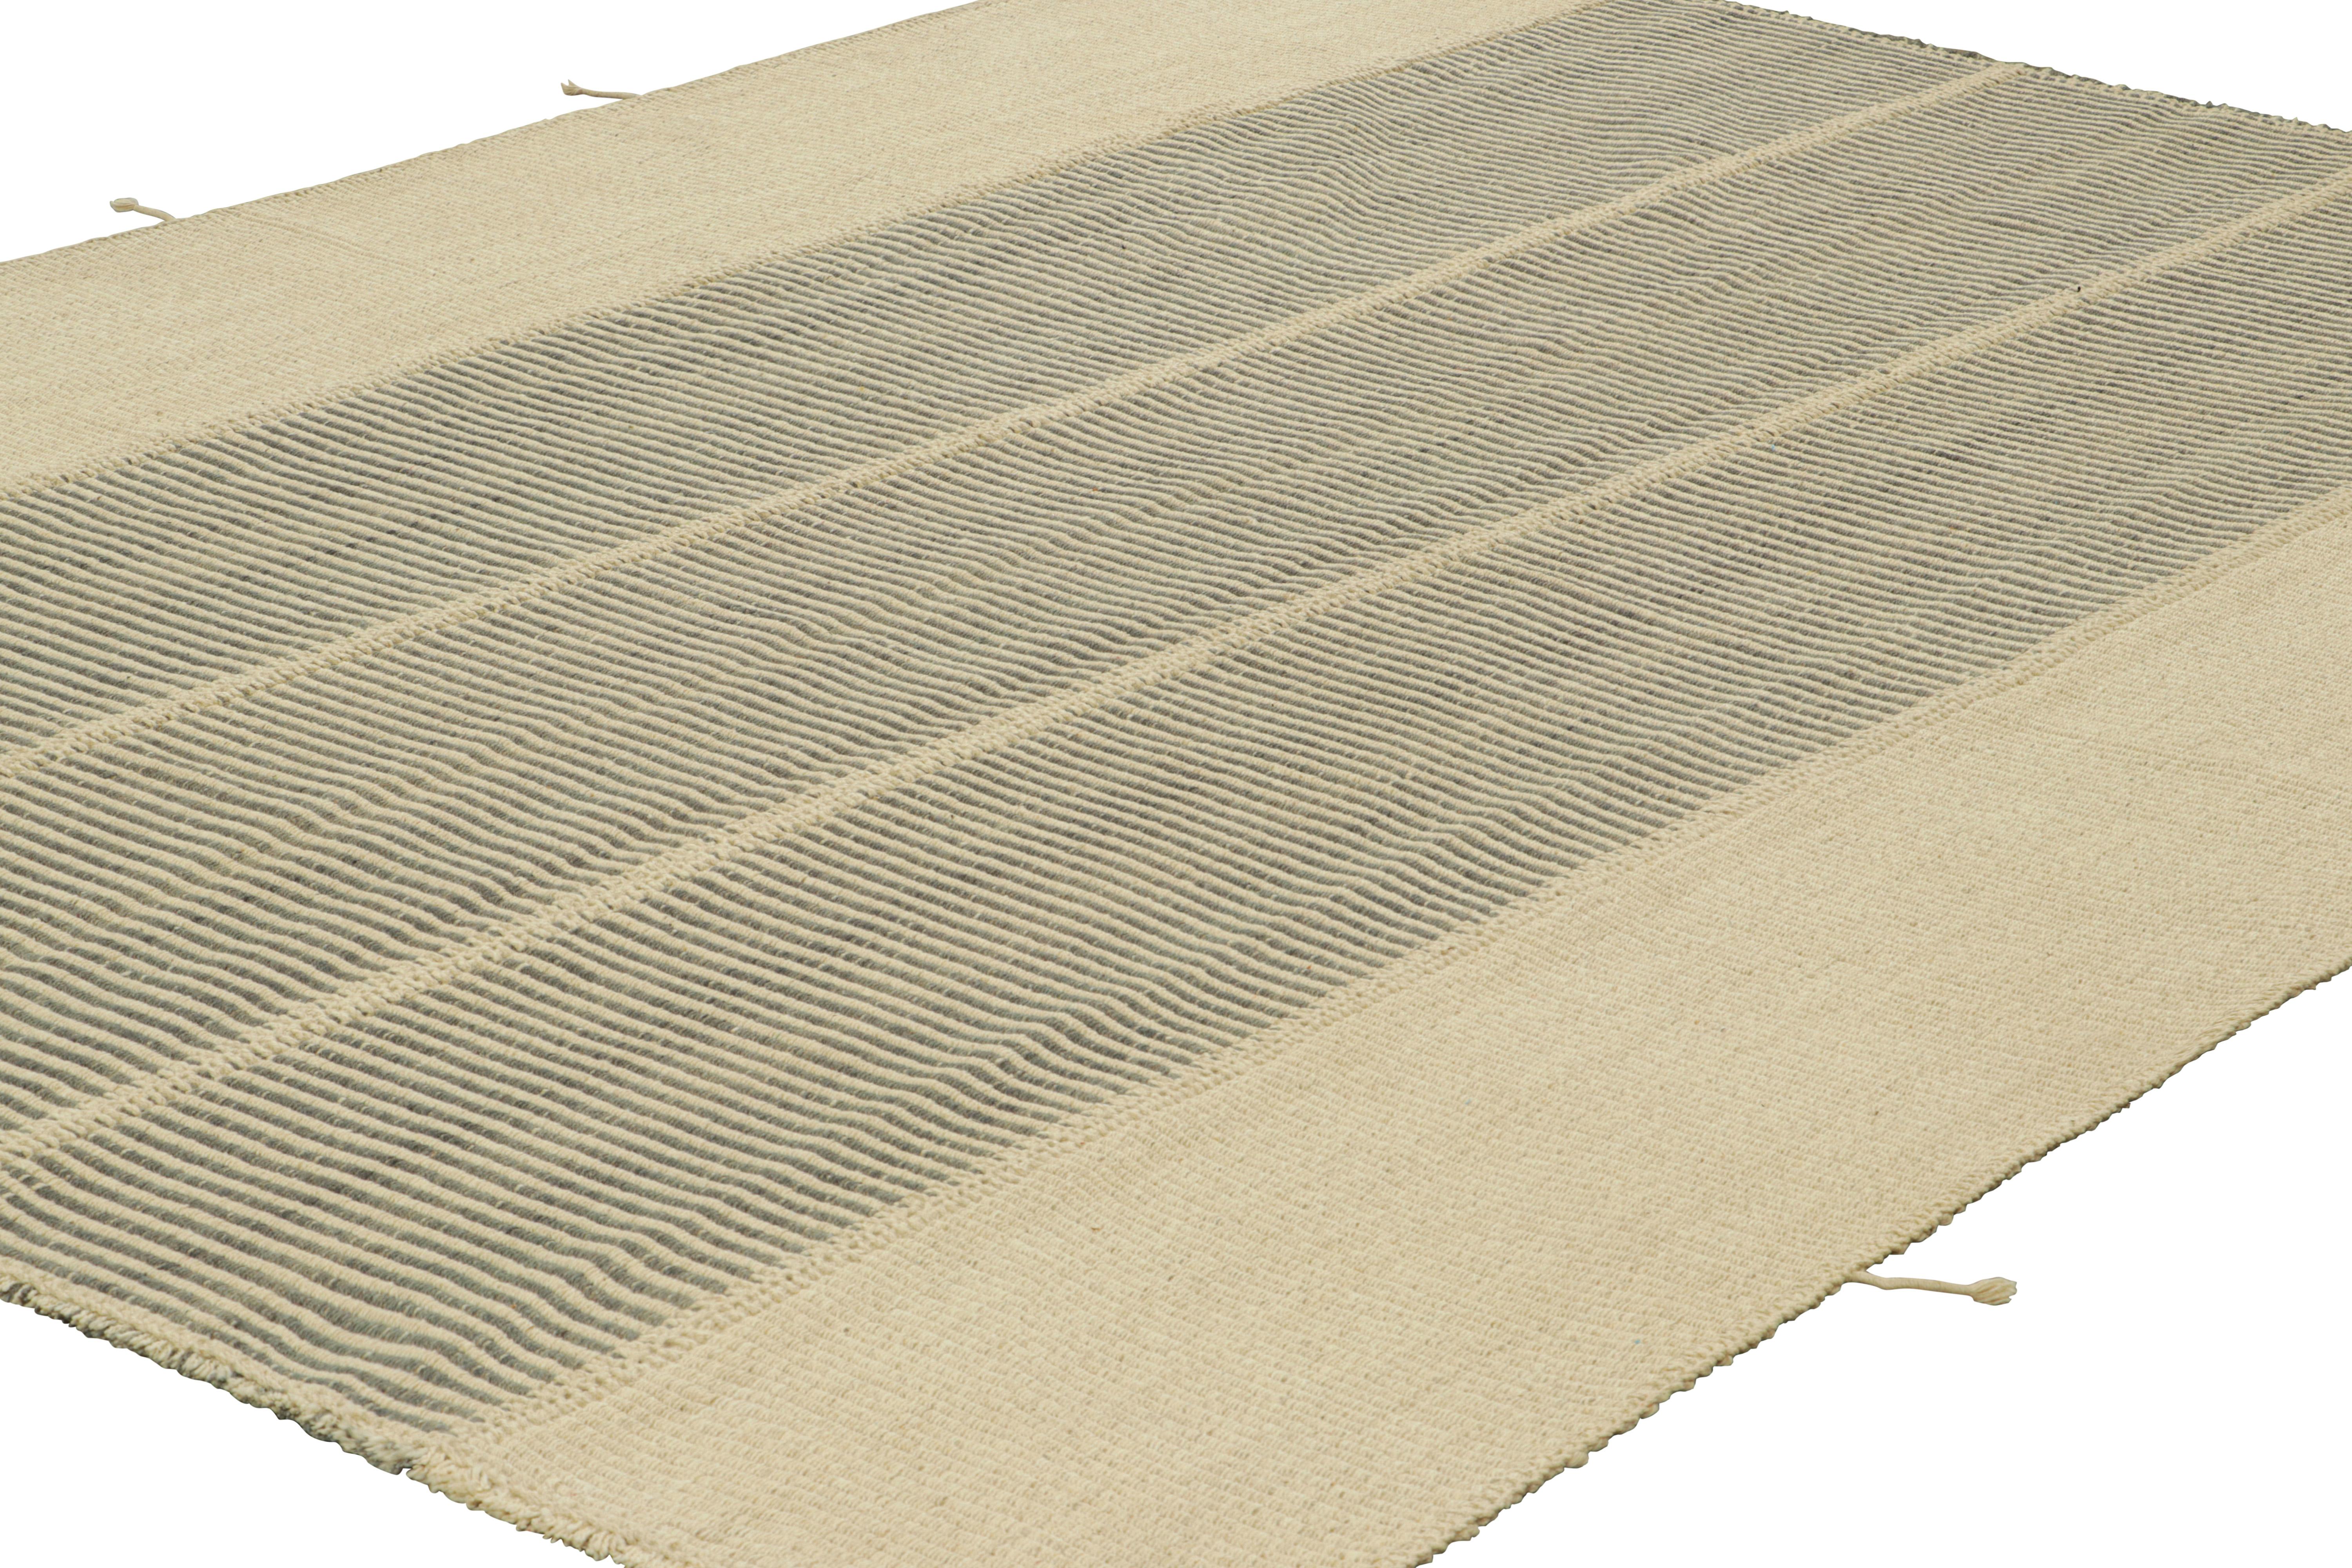 Afghan Rug & Kilim’s Contemporary Kilim in Beige and Gray Textural Stripes For Sale